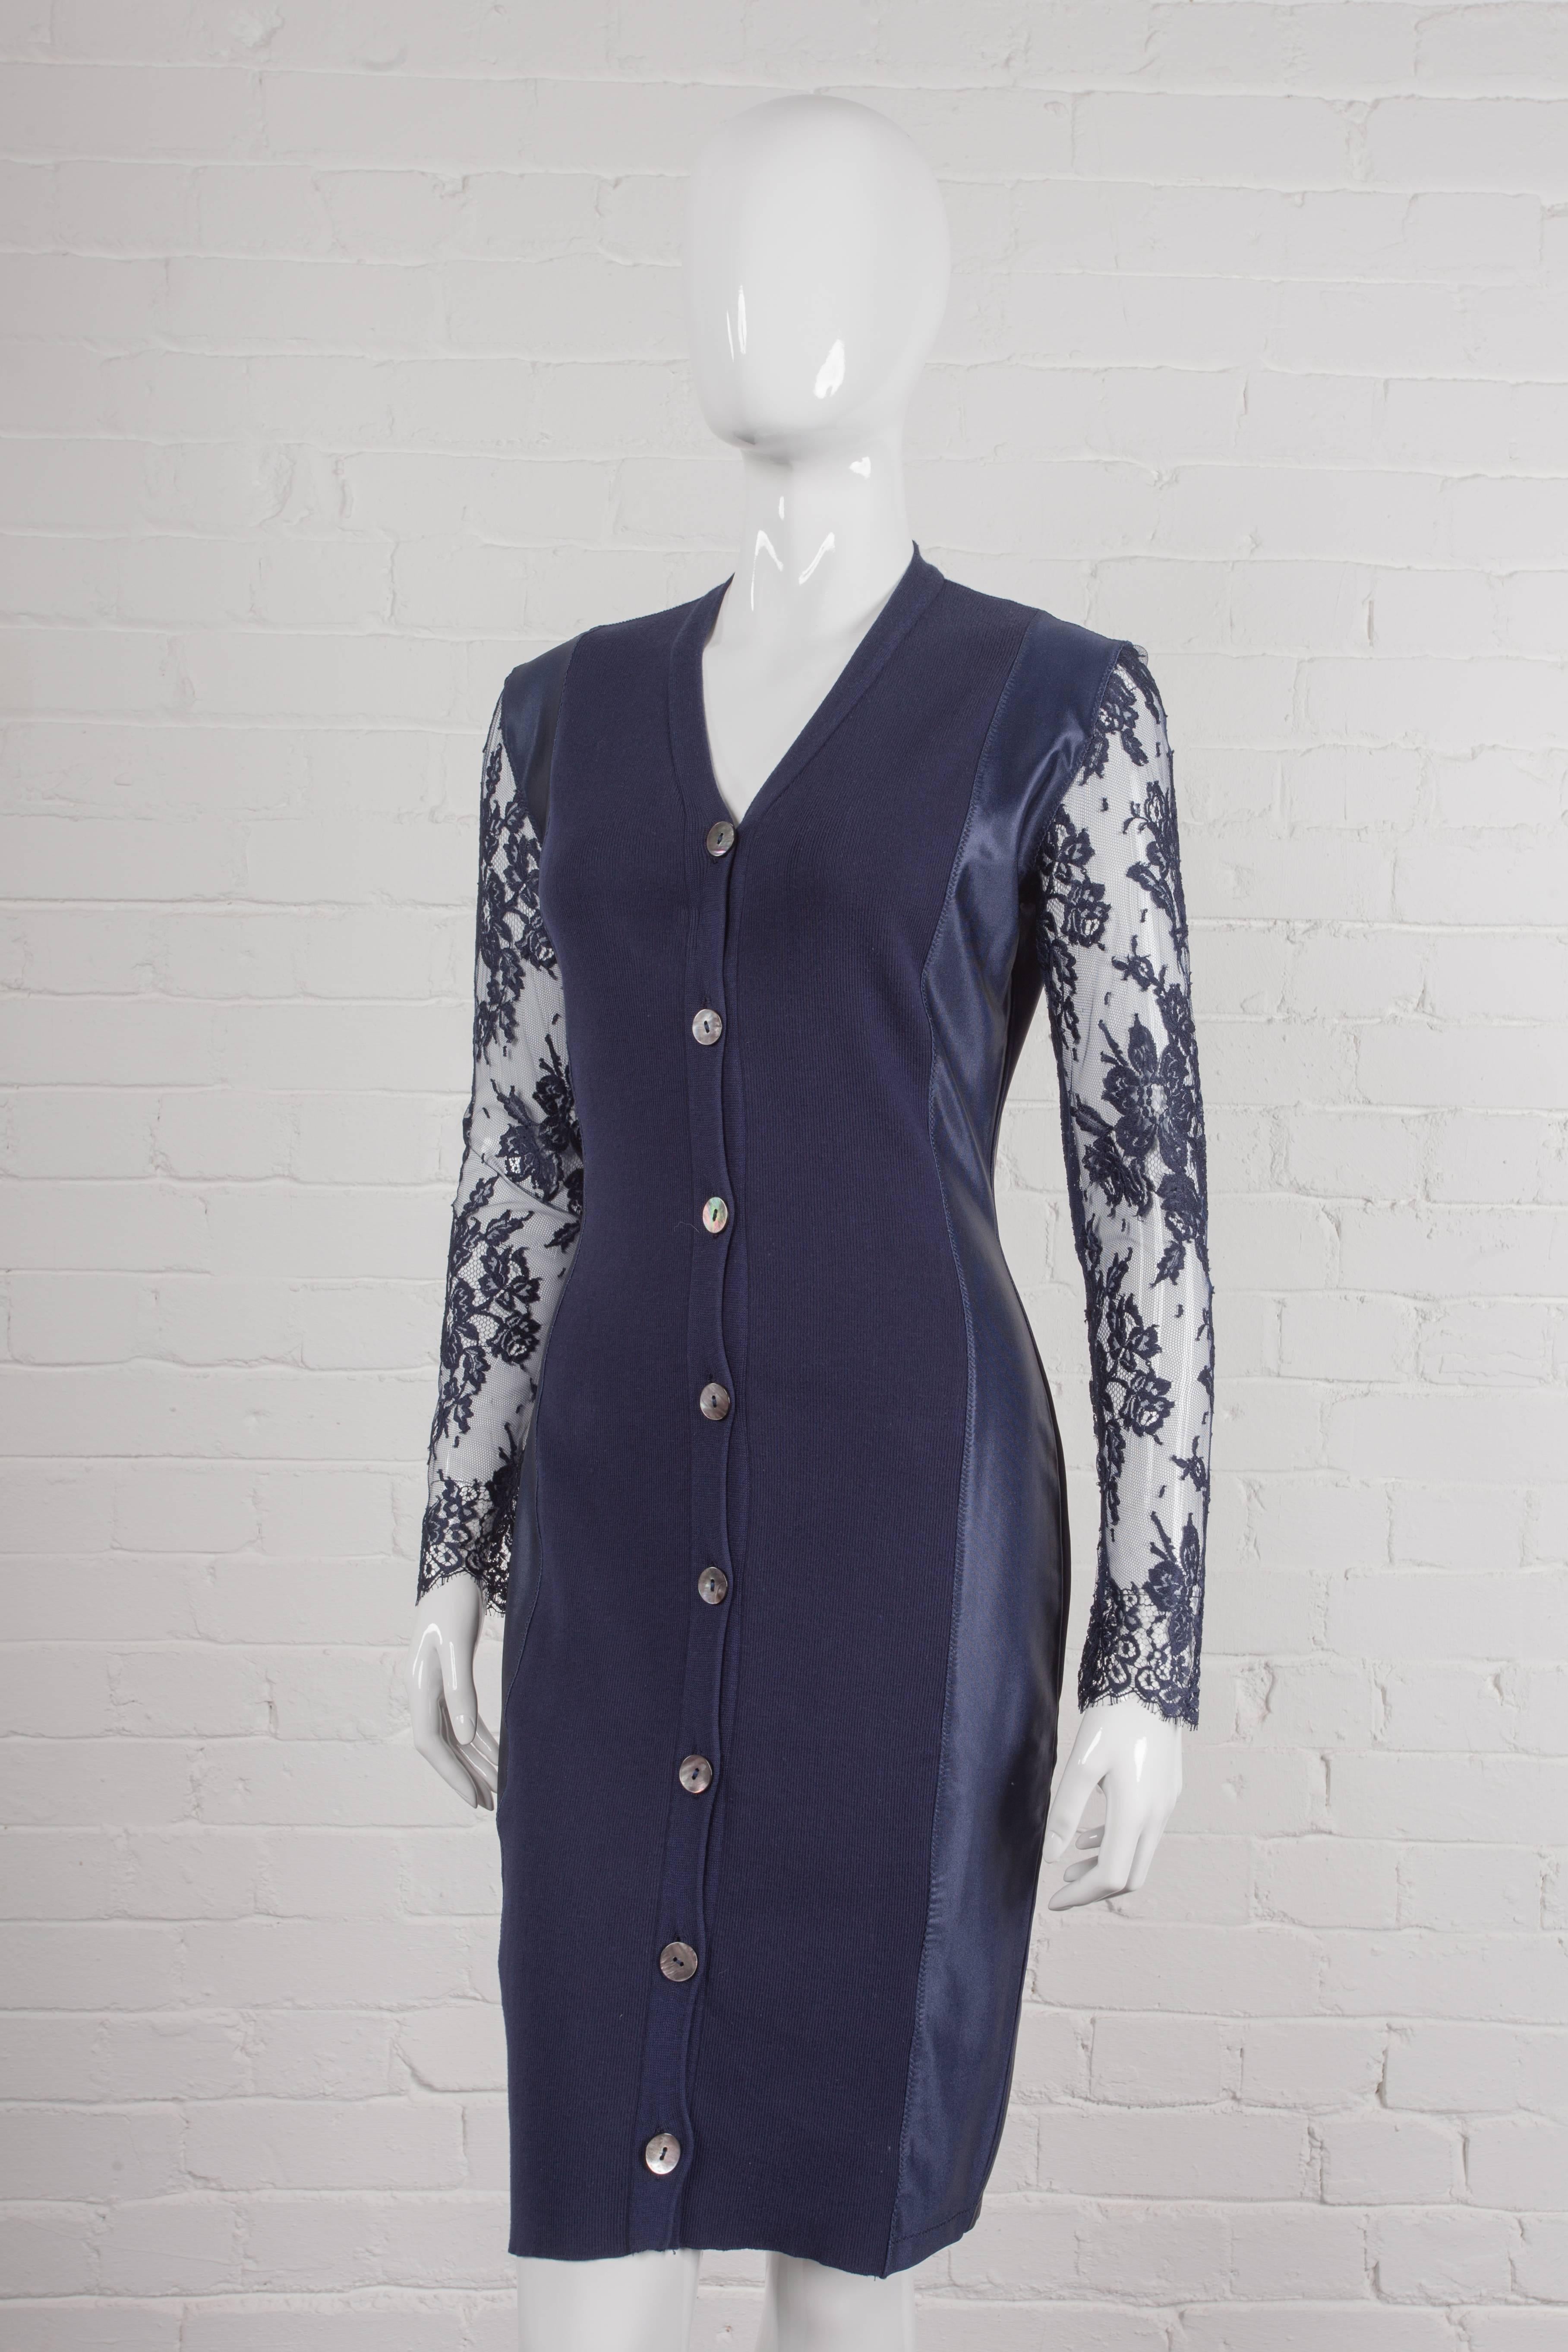 Vintage lace sleeve dress.

Cardigan-style dress with lace sleeves, and ribbed cotton panels front and back, and Mother of Pearl buttons. Also featuring stretch polyamide elastane side panels. From the Fall/Winter 1988/89 “Boarding Schools”